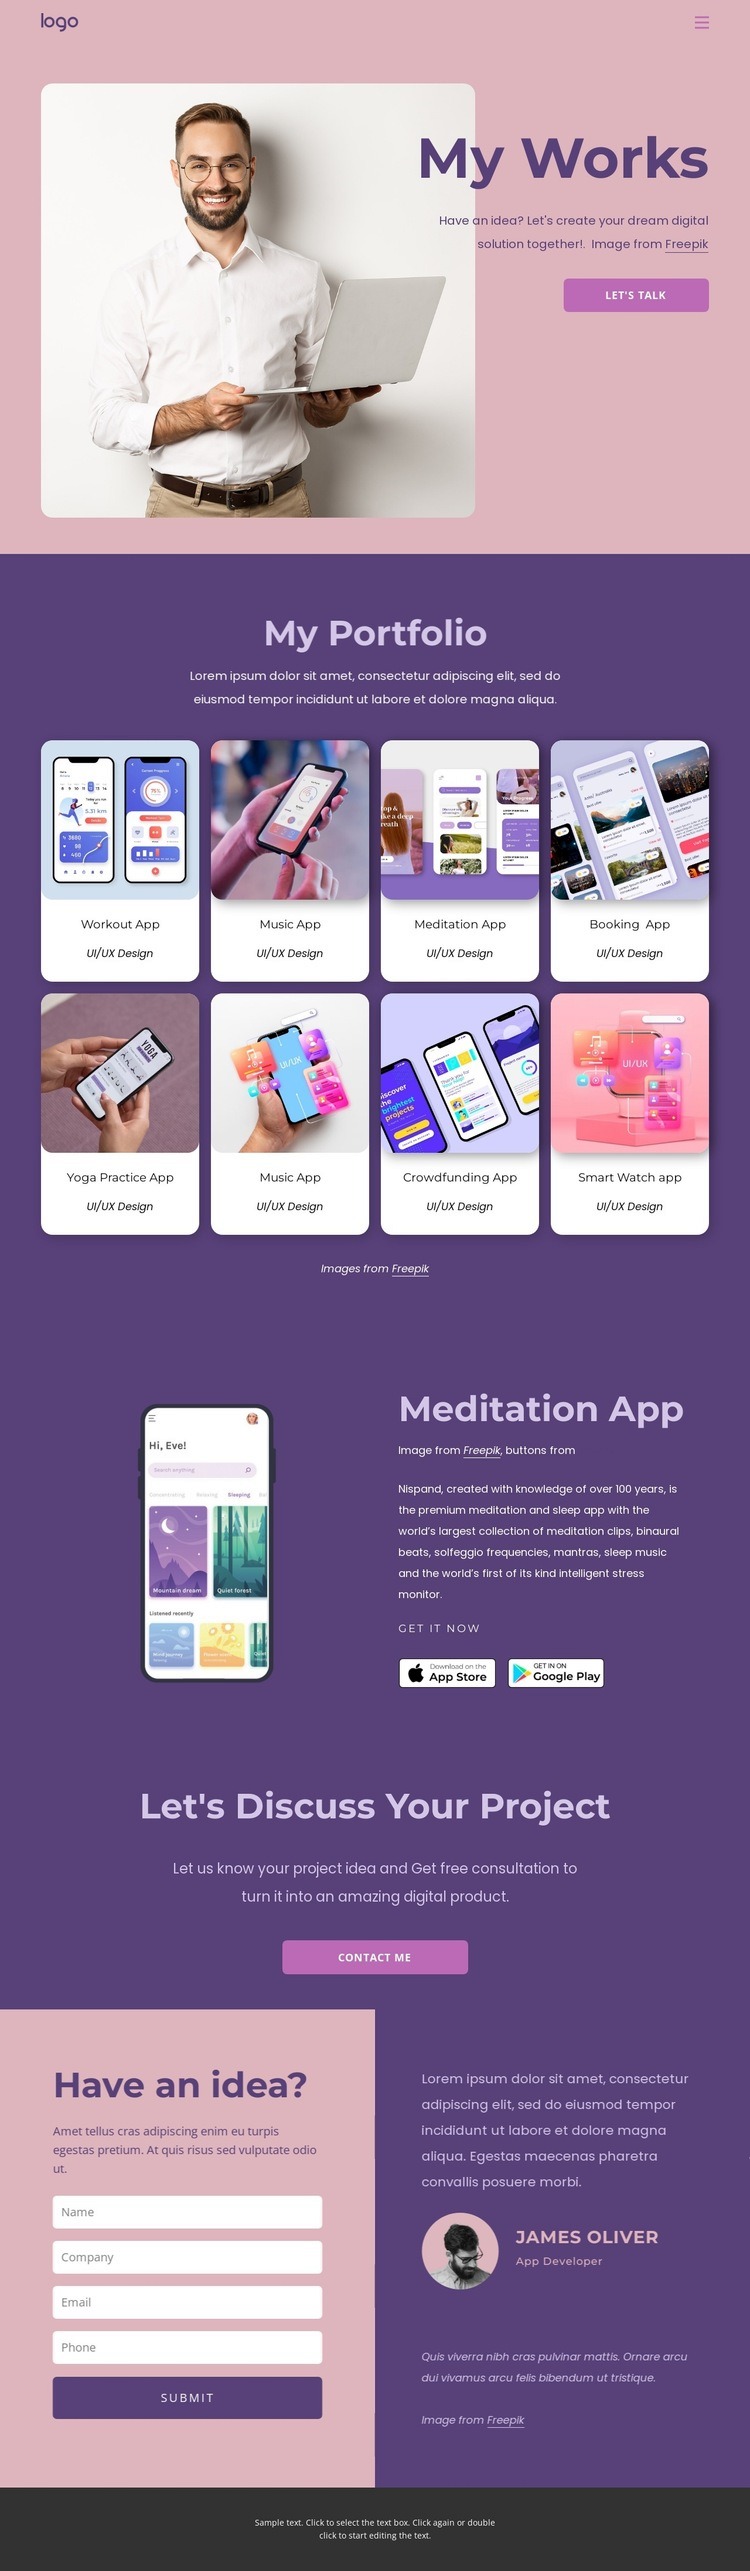 Custom iOS and Android apps for your business Webflow Template Alternative